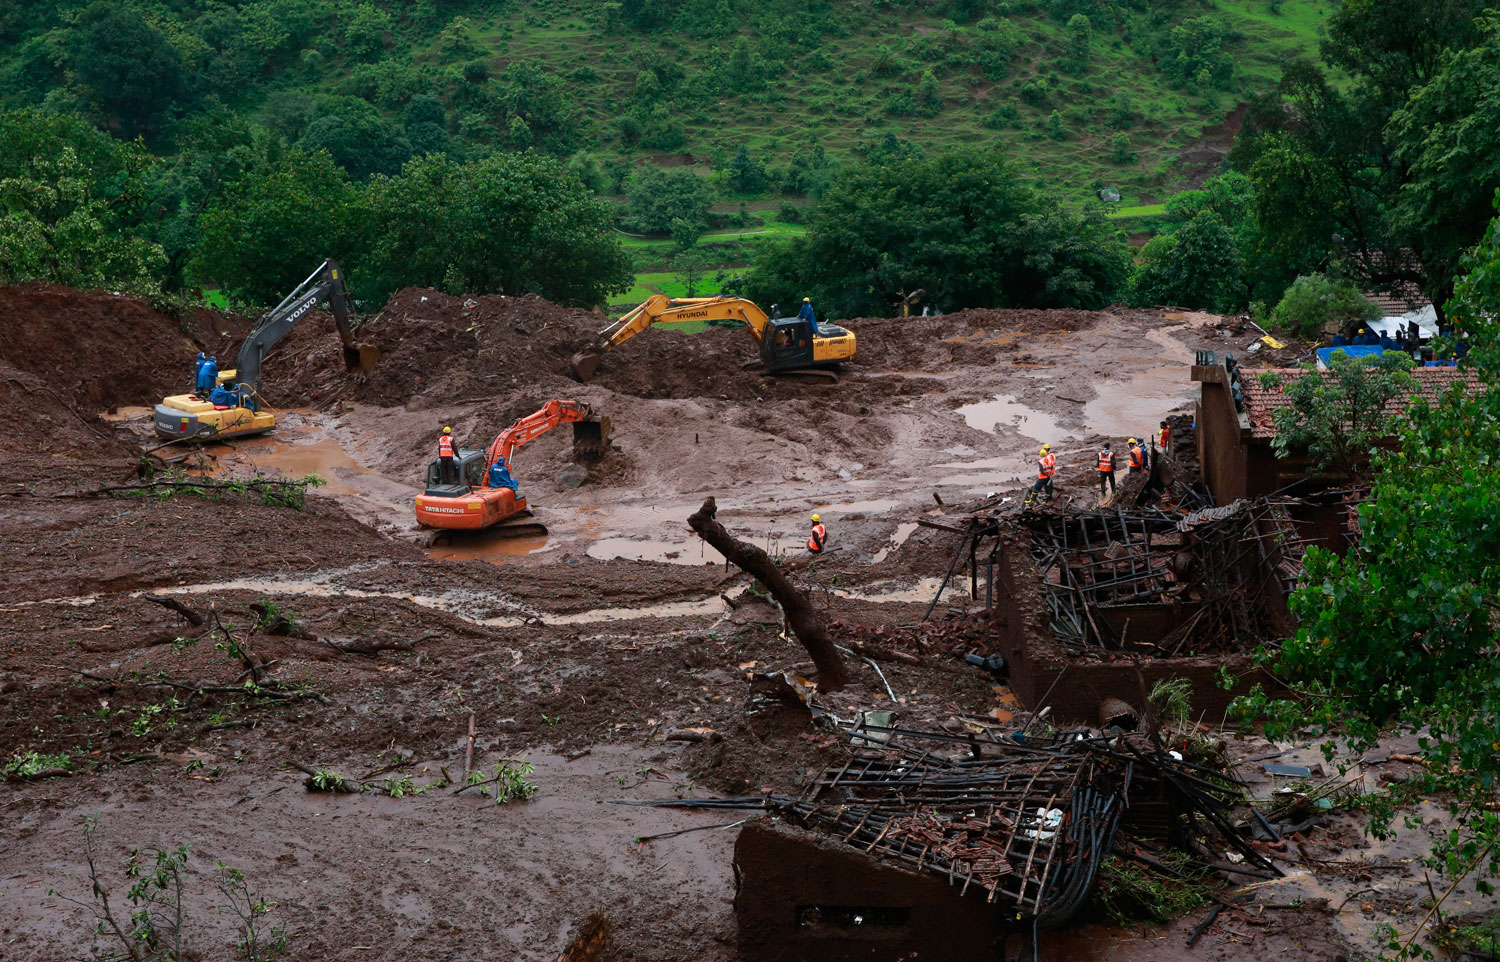 Earthmovers clear mud and slush at the site of a landslide in Malin village, in the western Indian state of Maharashtra on Aug. 1, 2014.